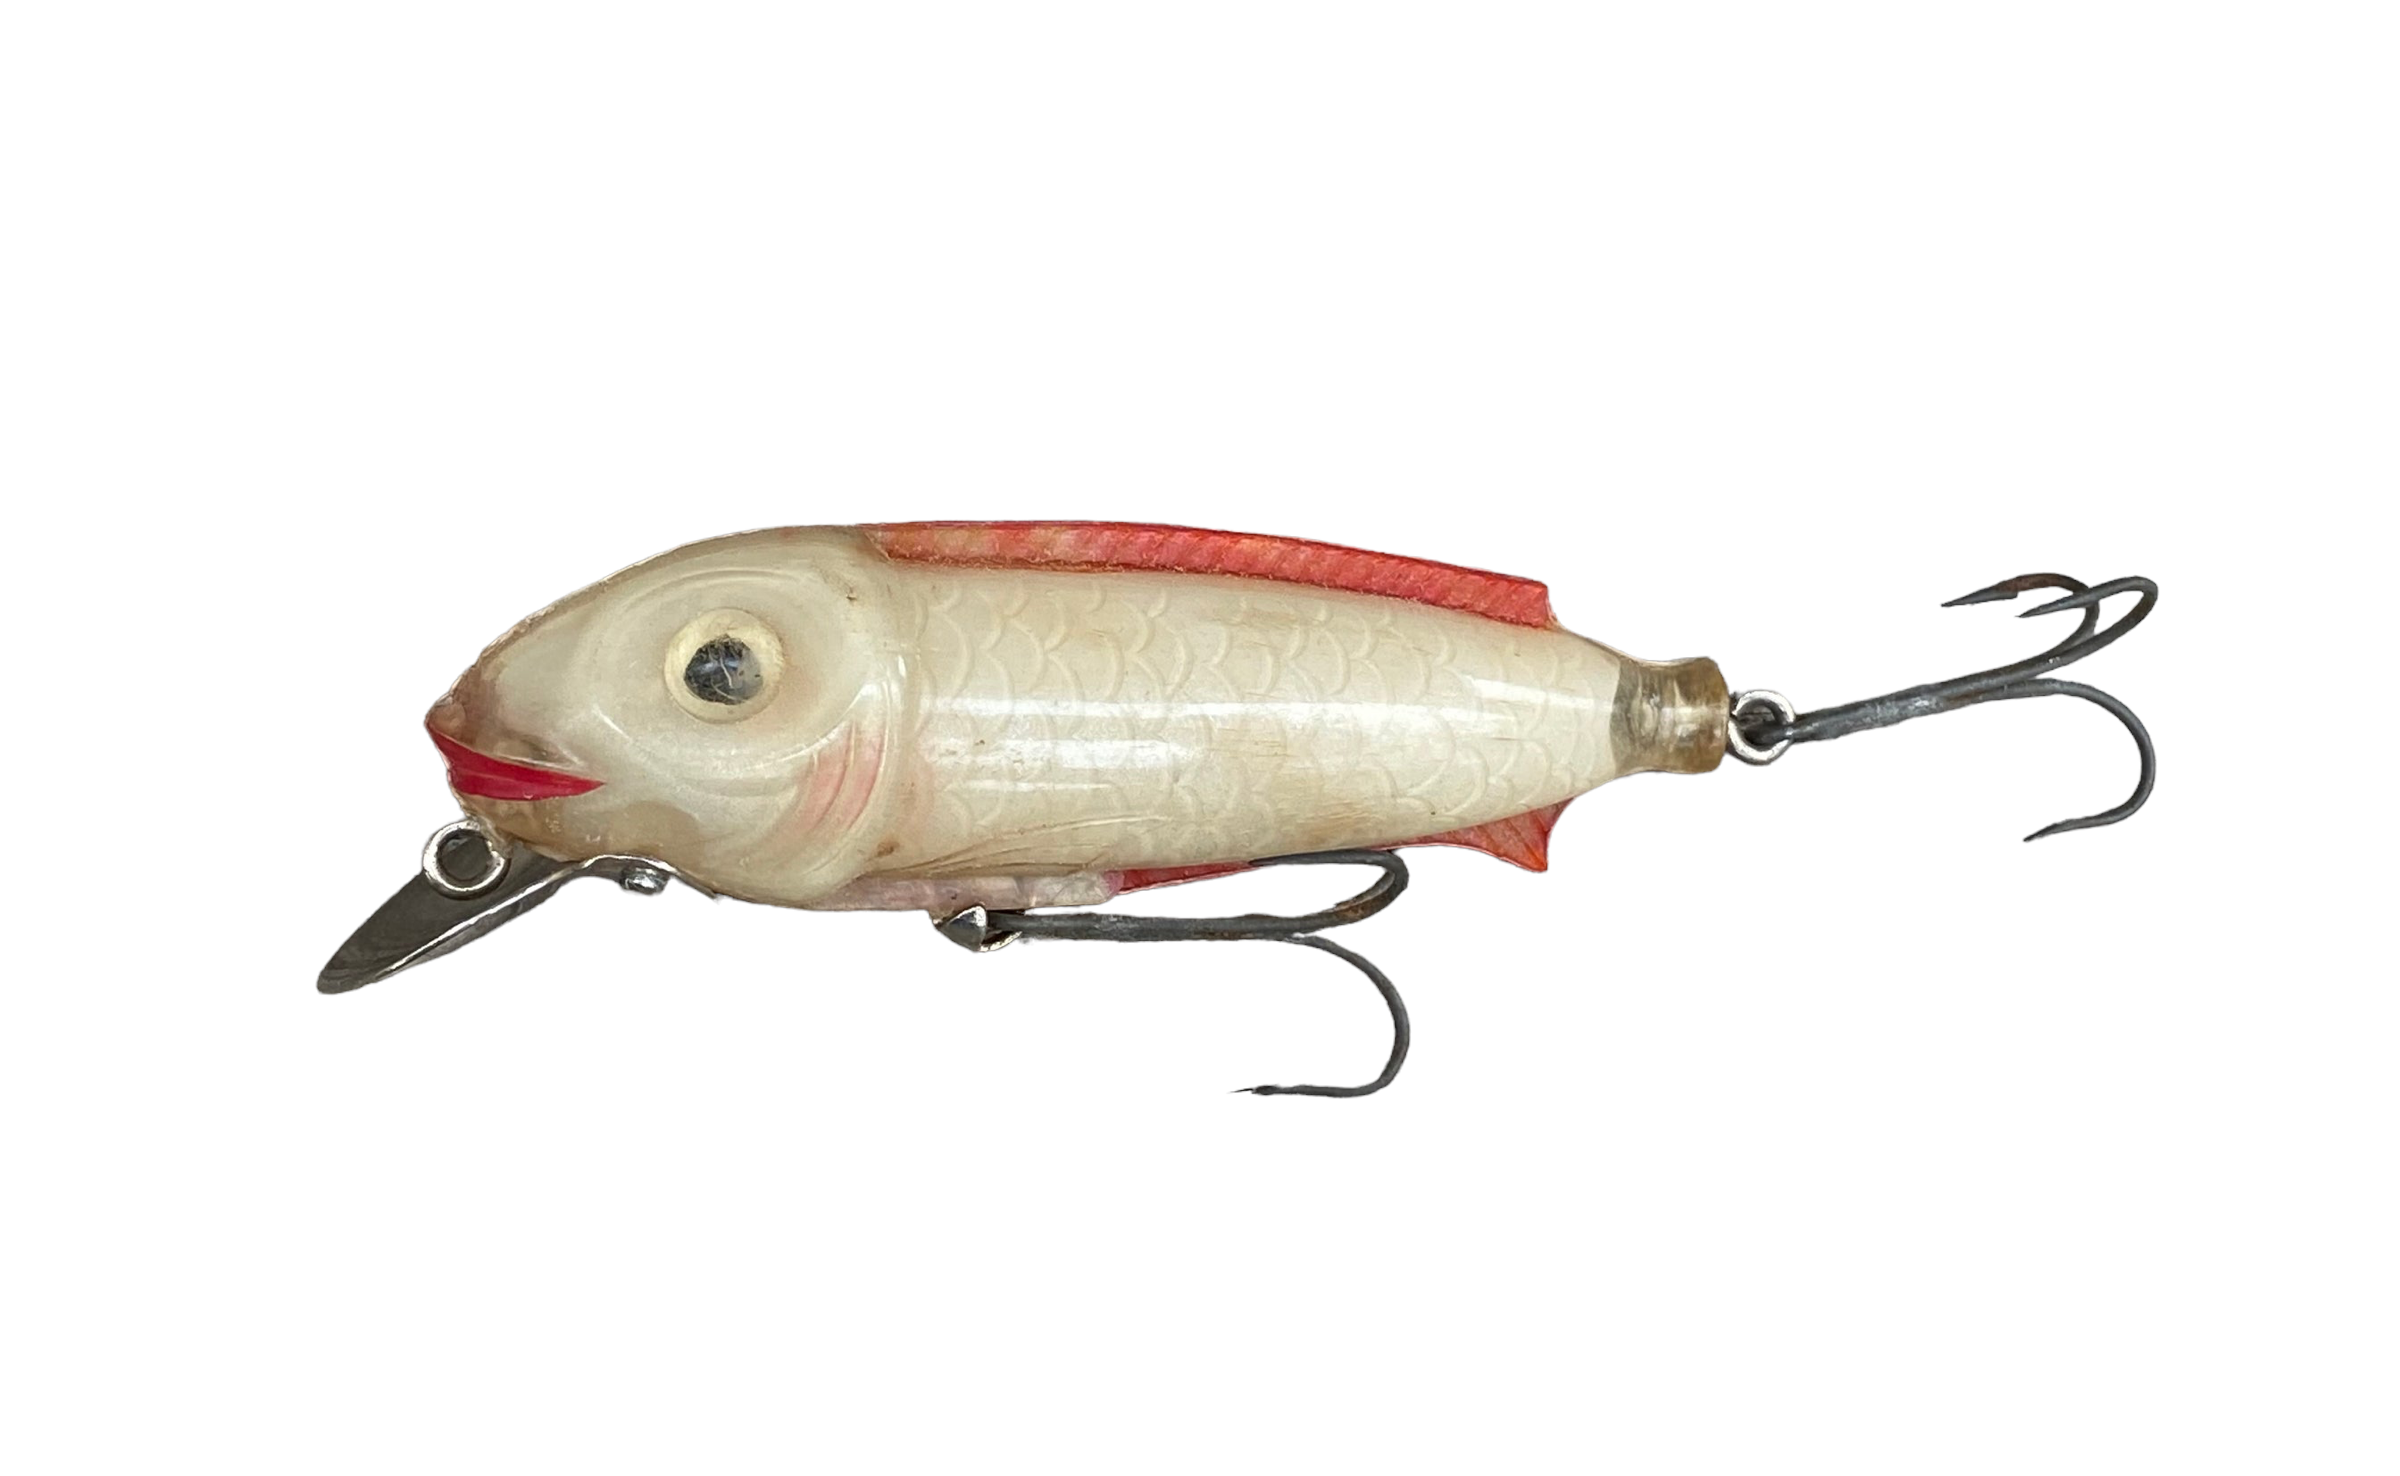 OLD DILLON BECK MANUFACTURING CO. KILLER DILLER FISHING LURE c